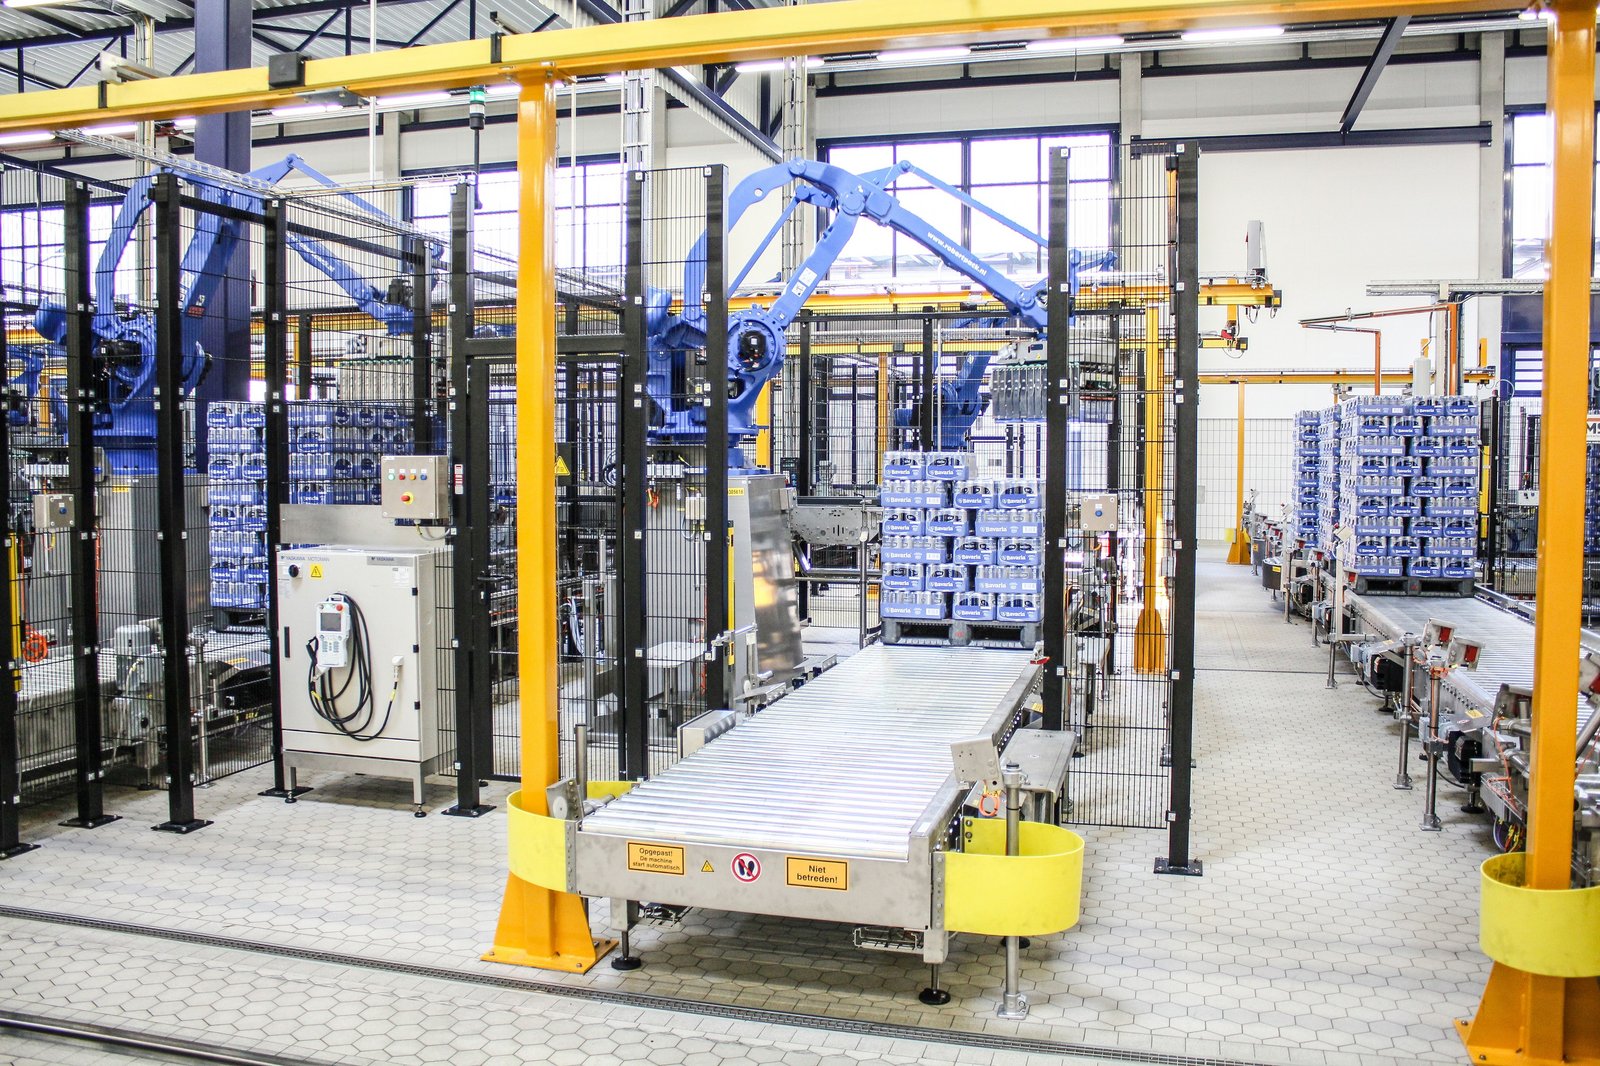 robertpack-robot-palletising-line-with-yaskawa-robot-for-palletising-trays-with-beer-at-bavaria-in-lieshout